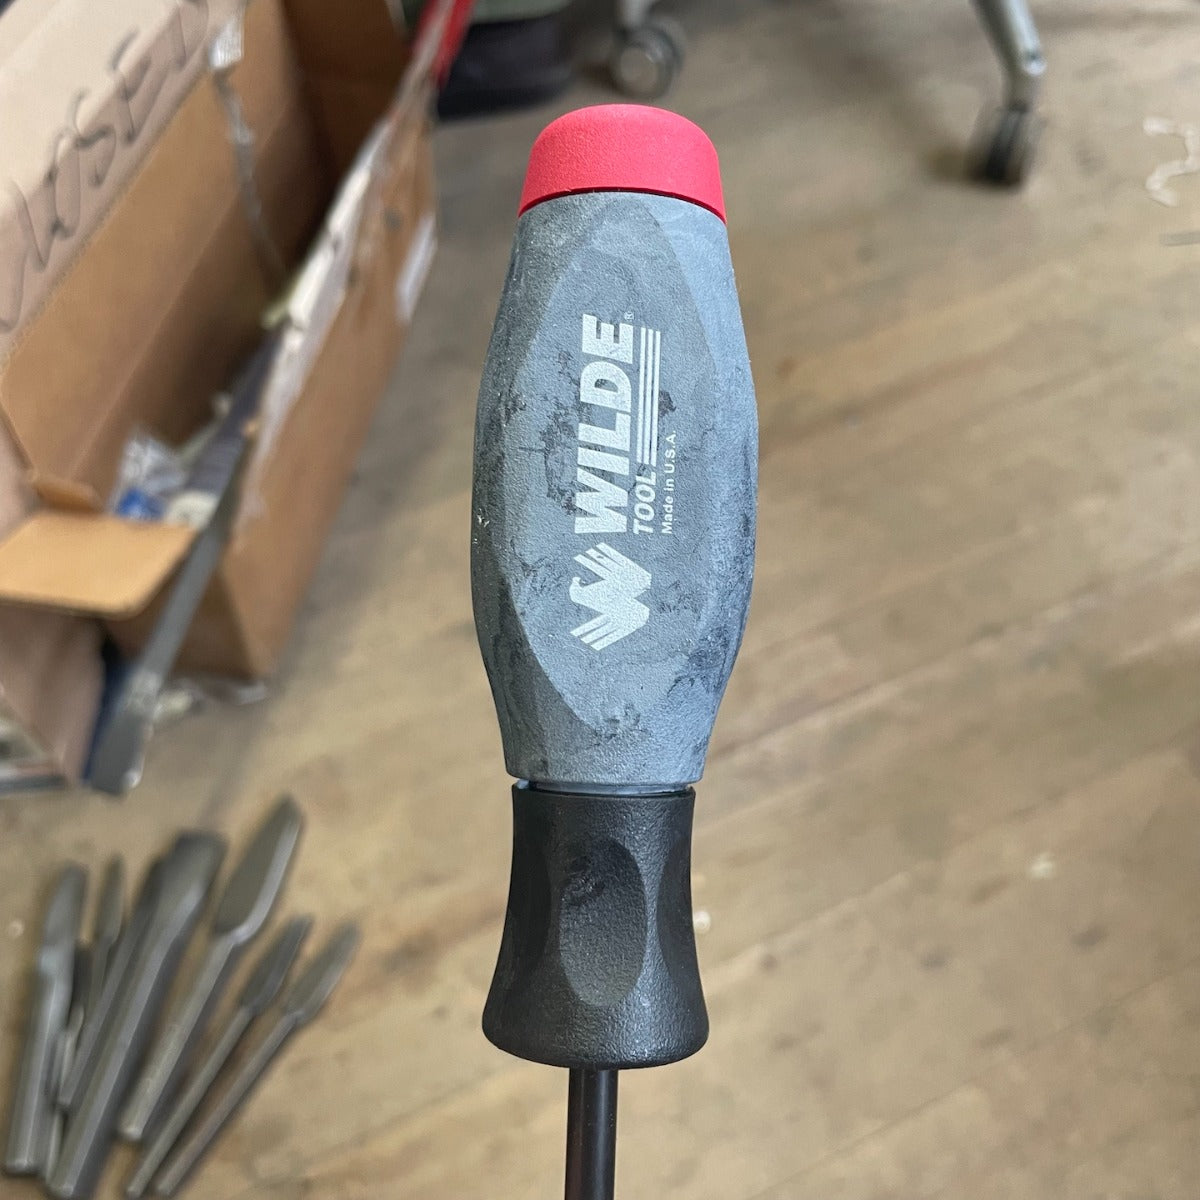 1/4" Wilde Slotted Screwdriver 6" Blade - 10 3/4" Overall